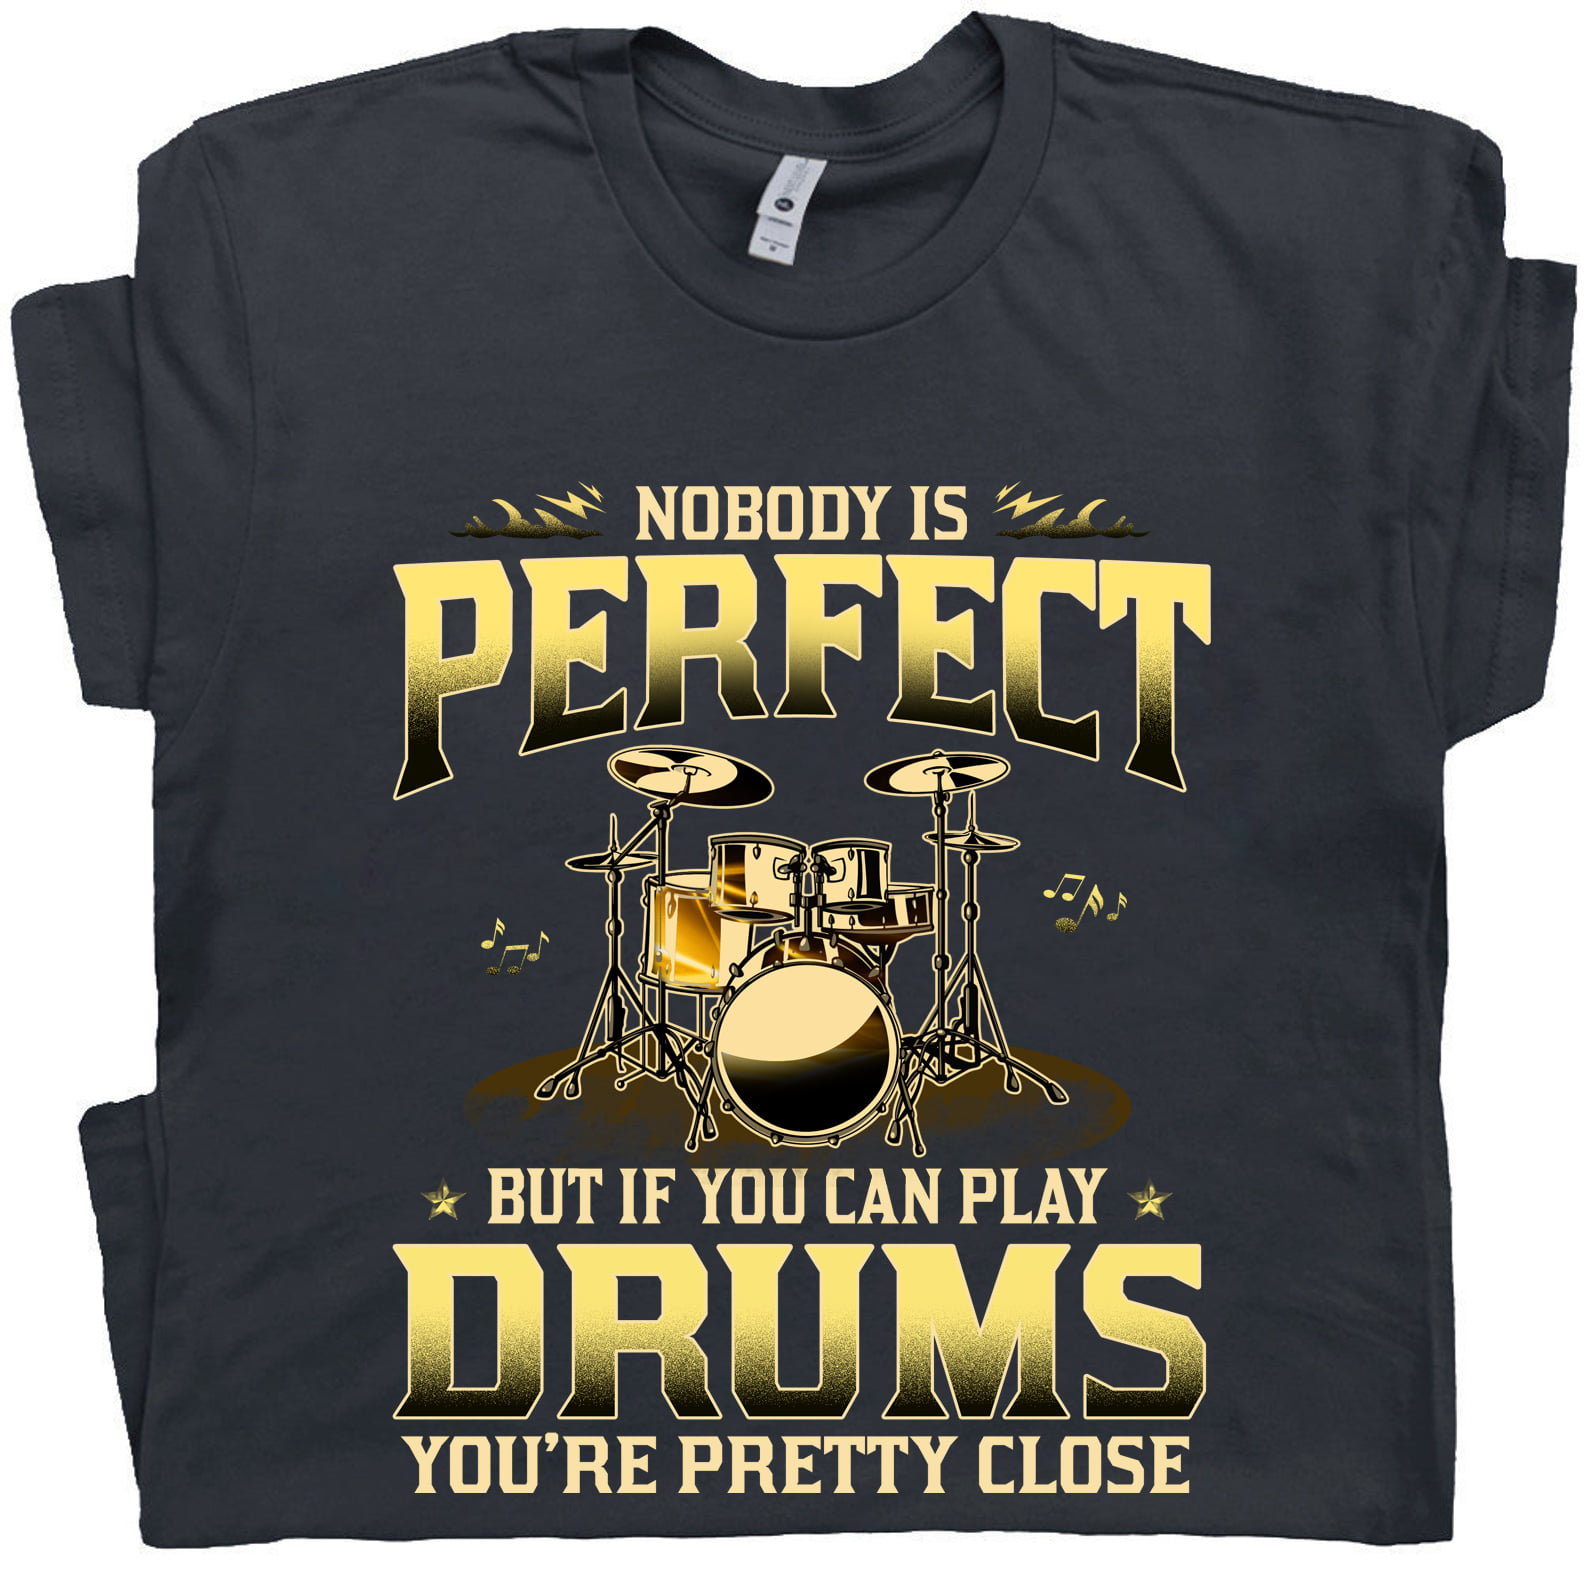 Nobody is perfect but if you can play drums you're pretty close